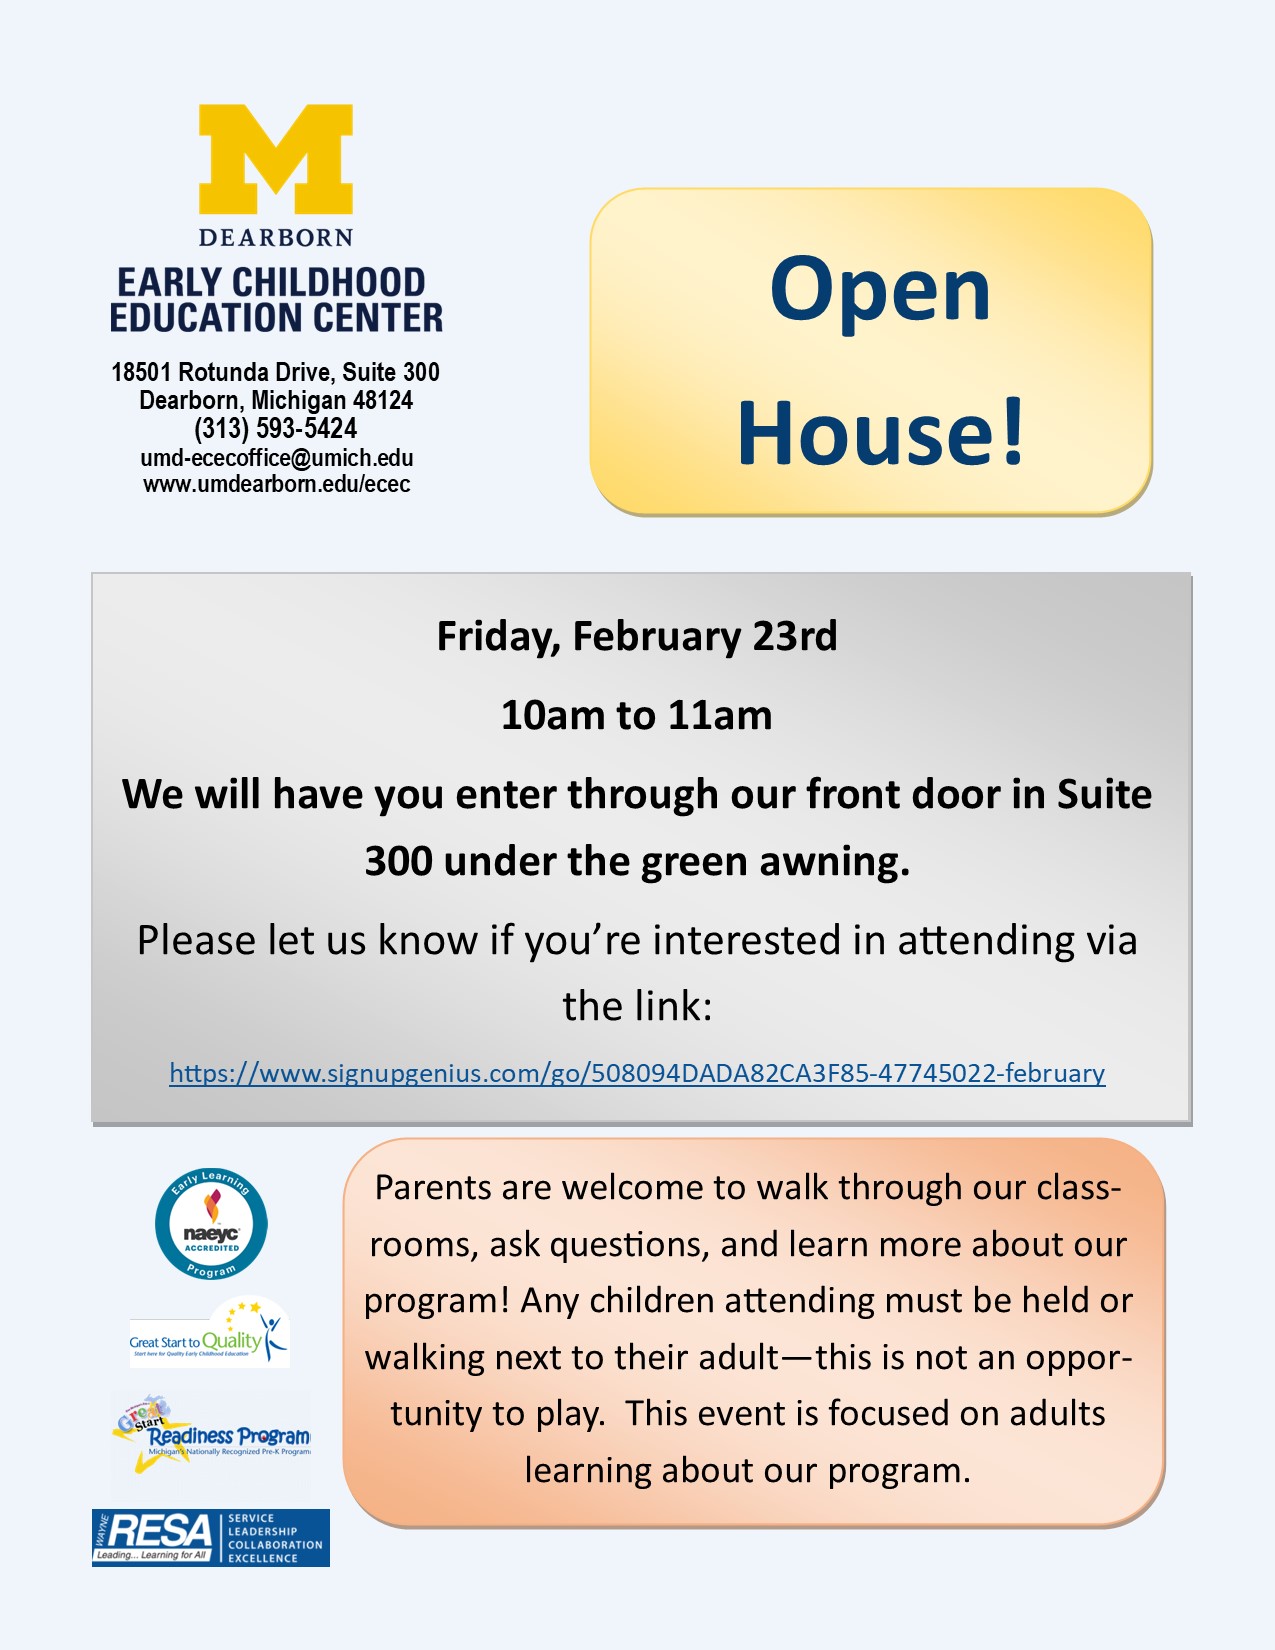 The ECEC is hosting an Open House on Friday, February 23rd from 10am to 11am for future and perspective families to see our program! Program staff will be available to answer questions and you can see our classrooms